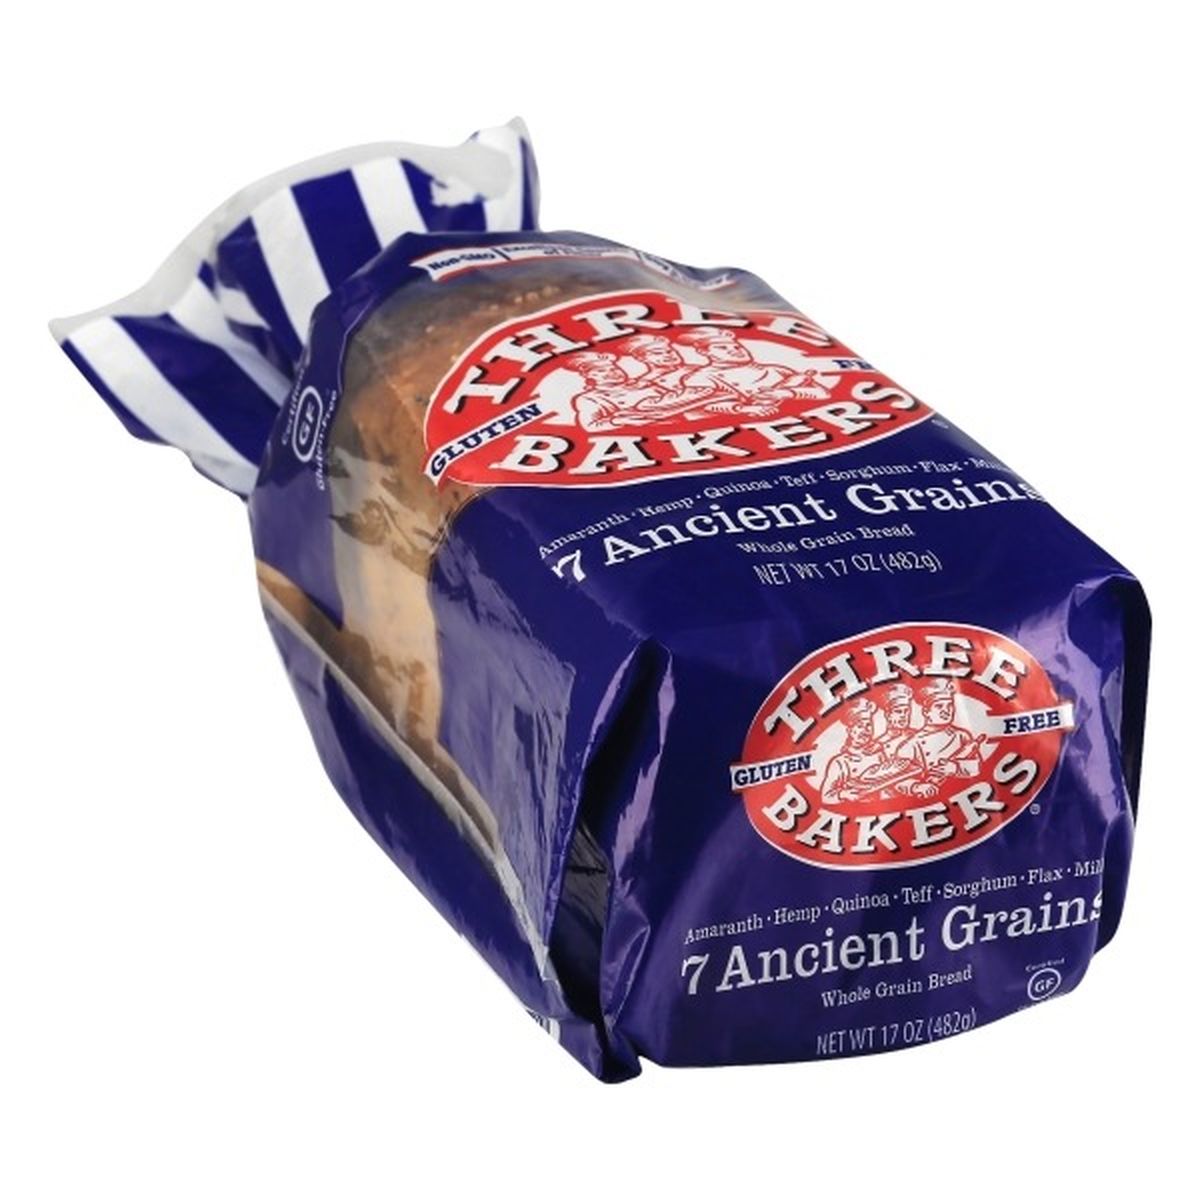 Calories in Three Bakers Bread, Gluten Free, Whole Grain, 7 Ancient Grains